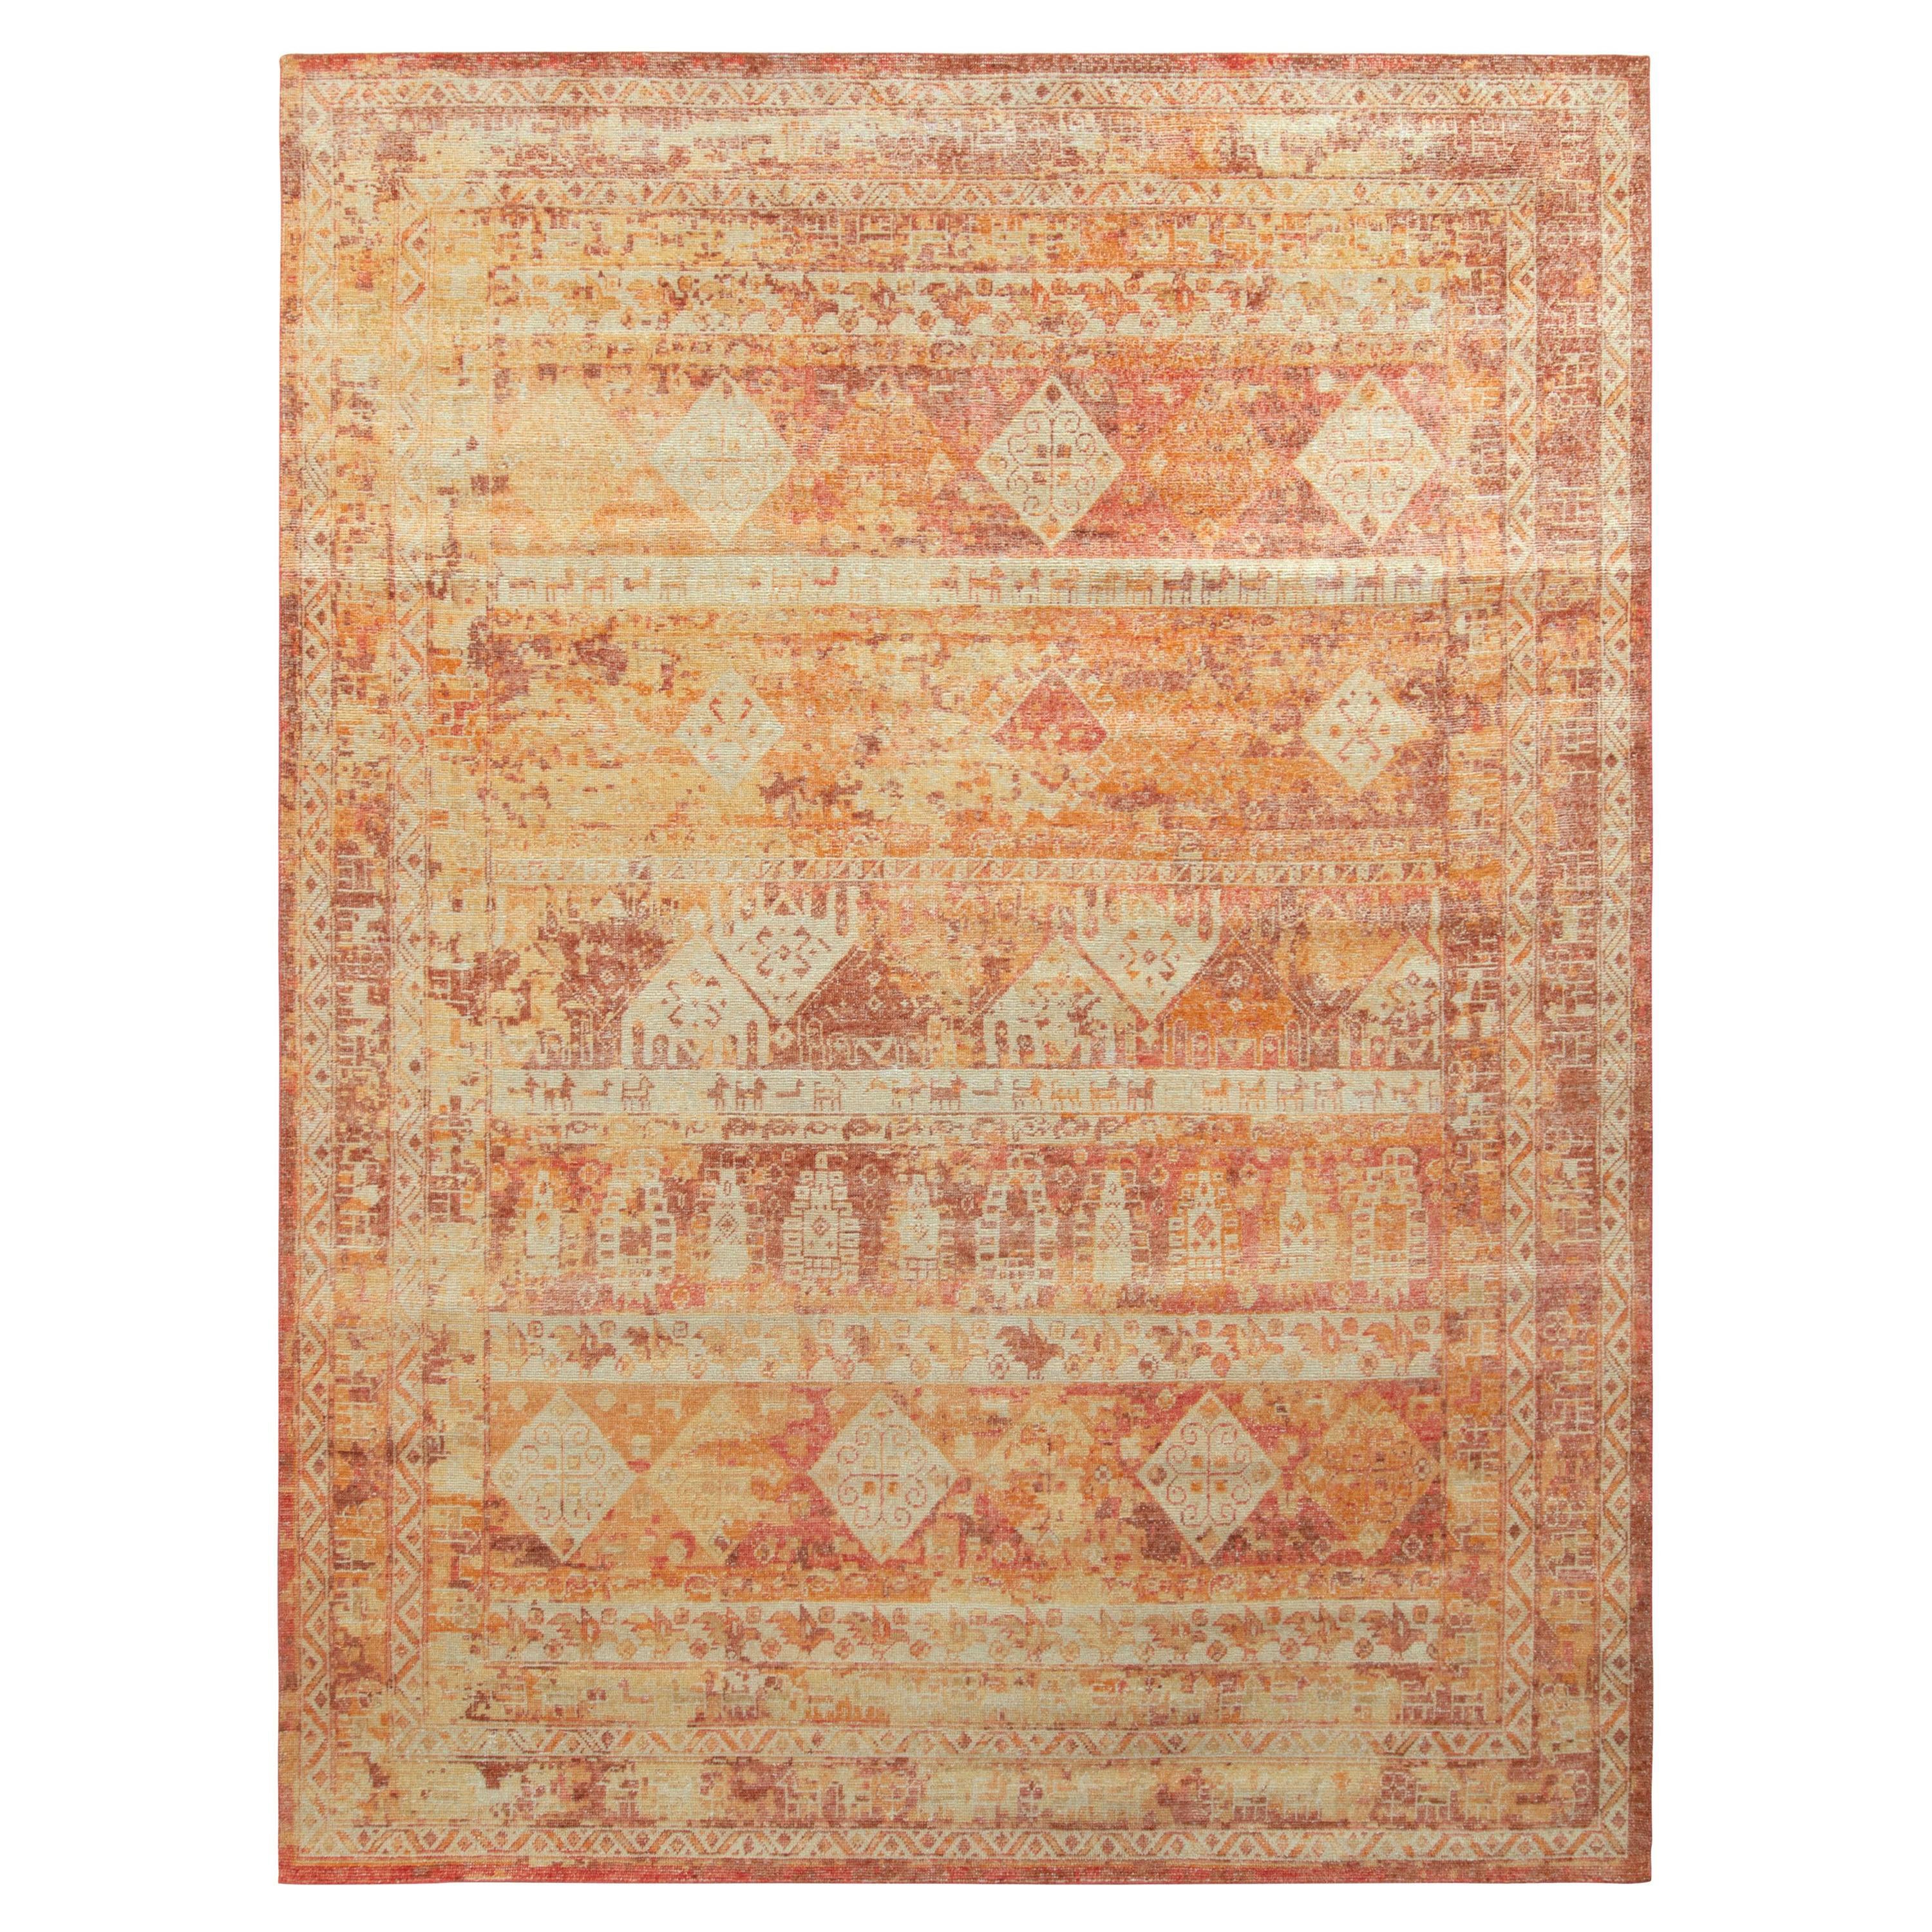 Rug & Kilim's Distressed Style Stammes-Teppich in Rot Orange Geometrisches Muster